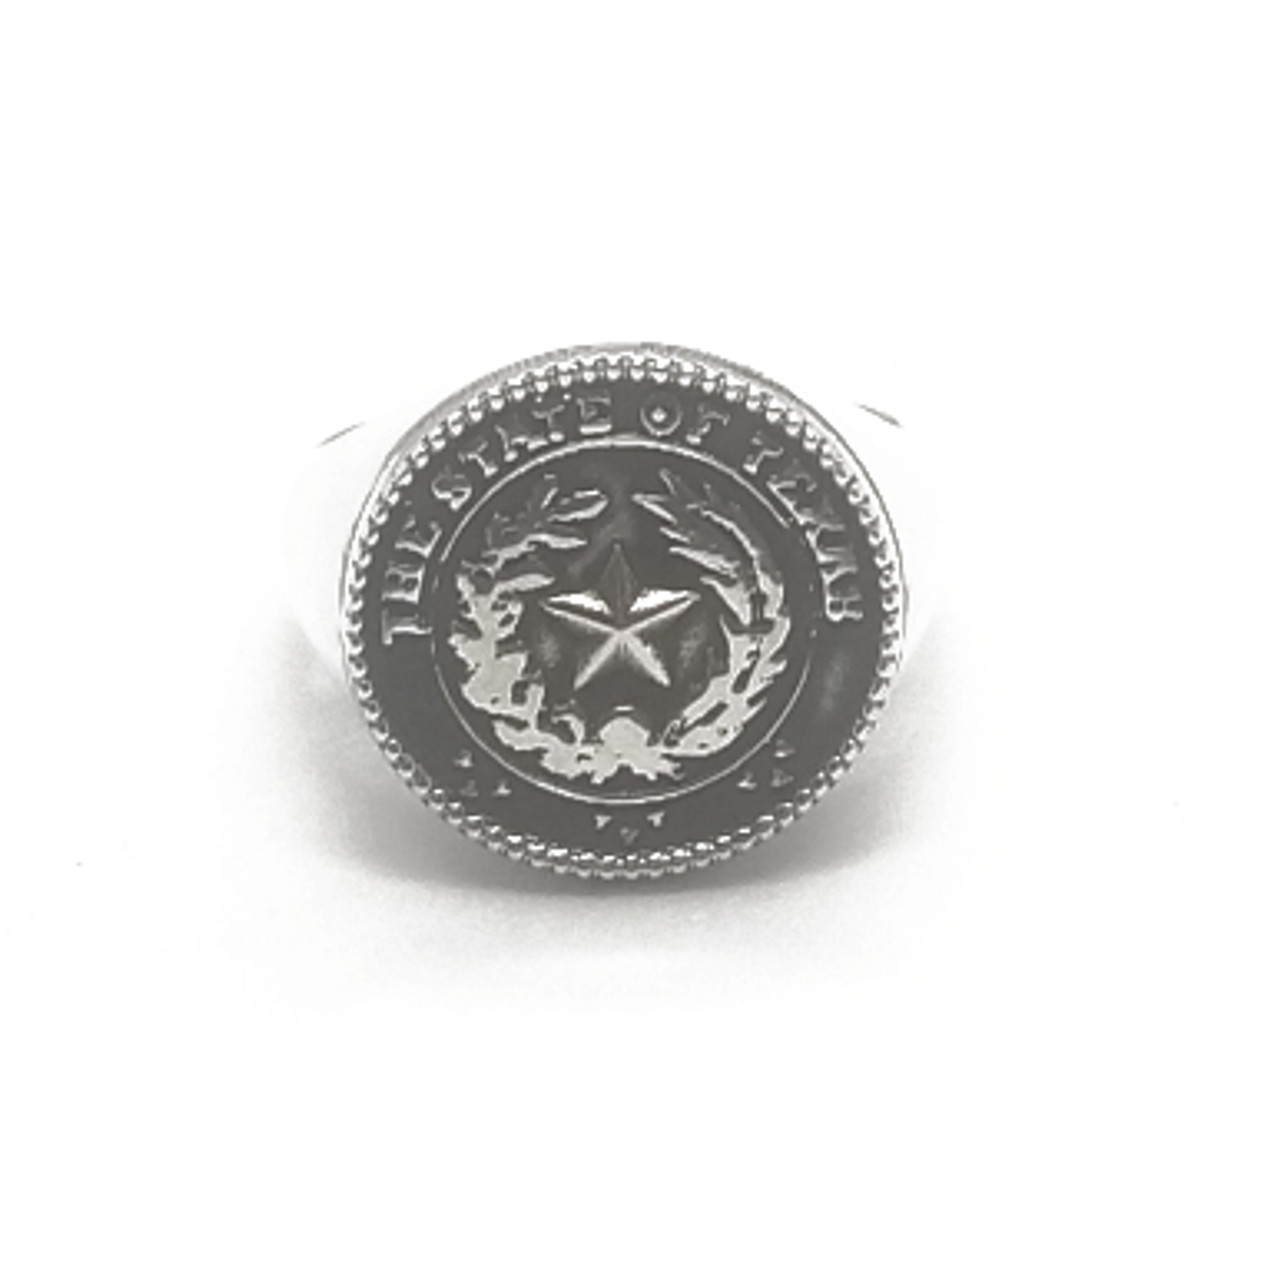 Texas State Seal Silver-Tone Tie Tack